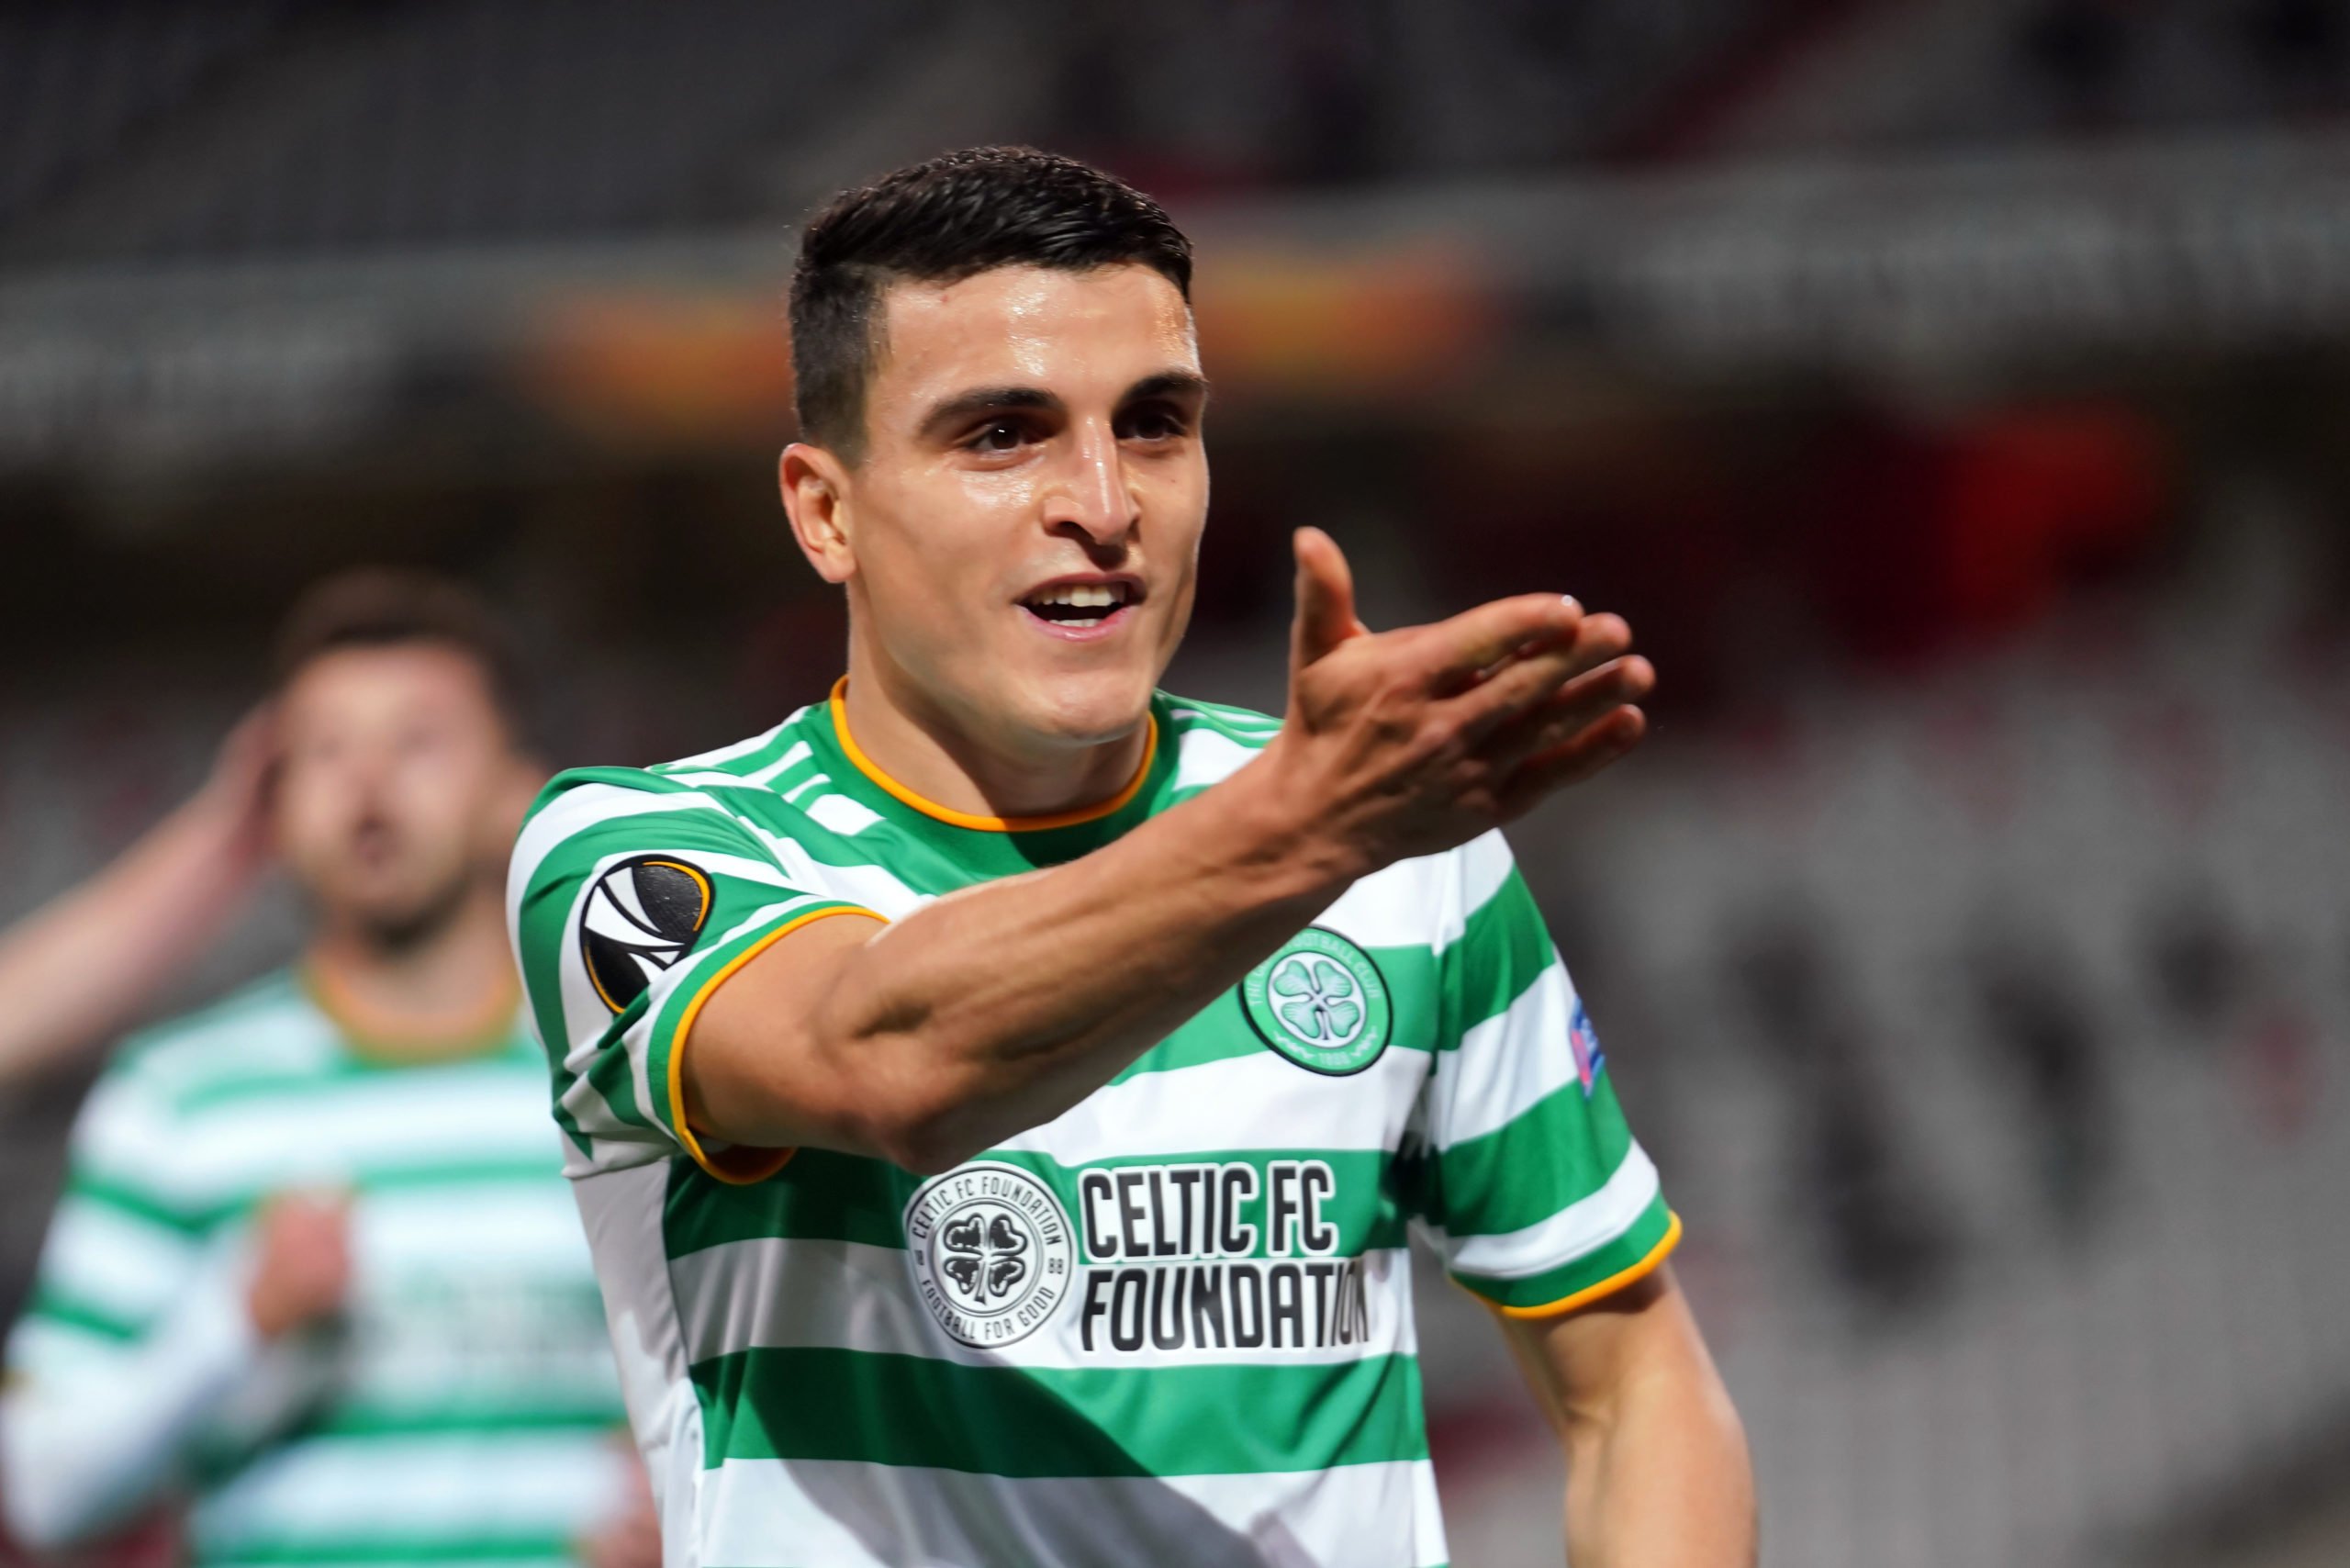 Vidar Riseth predicts Celtic deal for Elyounoussi; he knows Moi 'quite well'